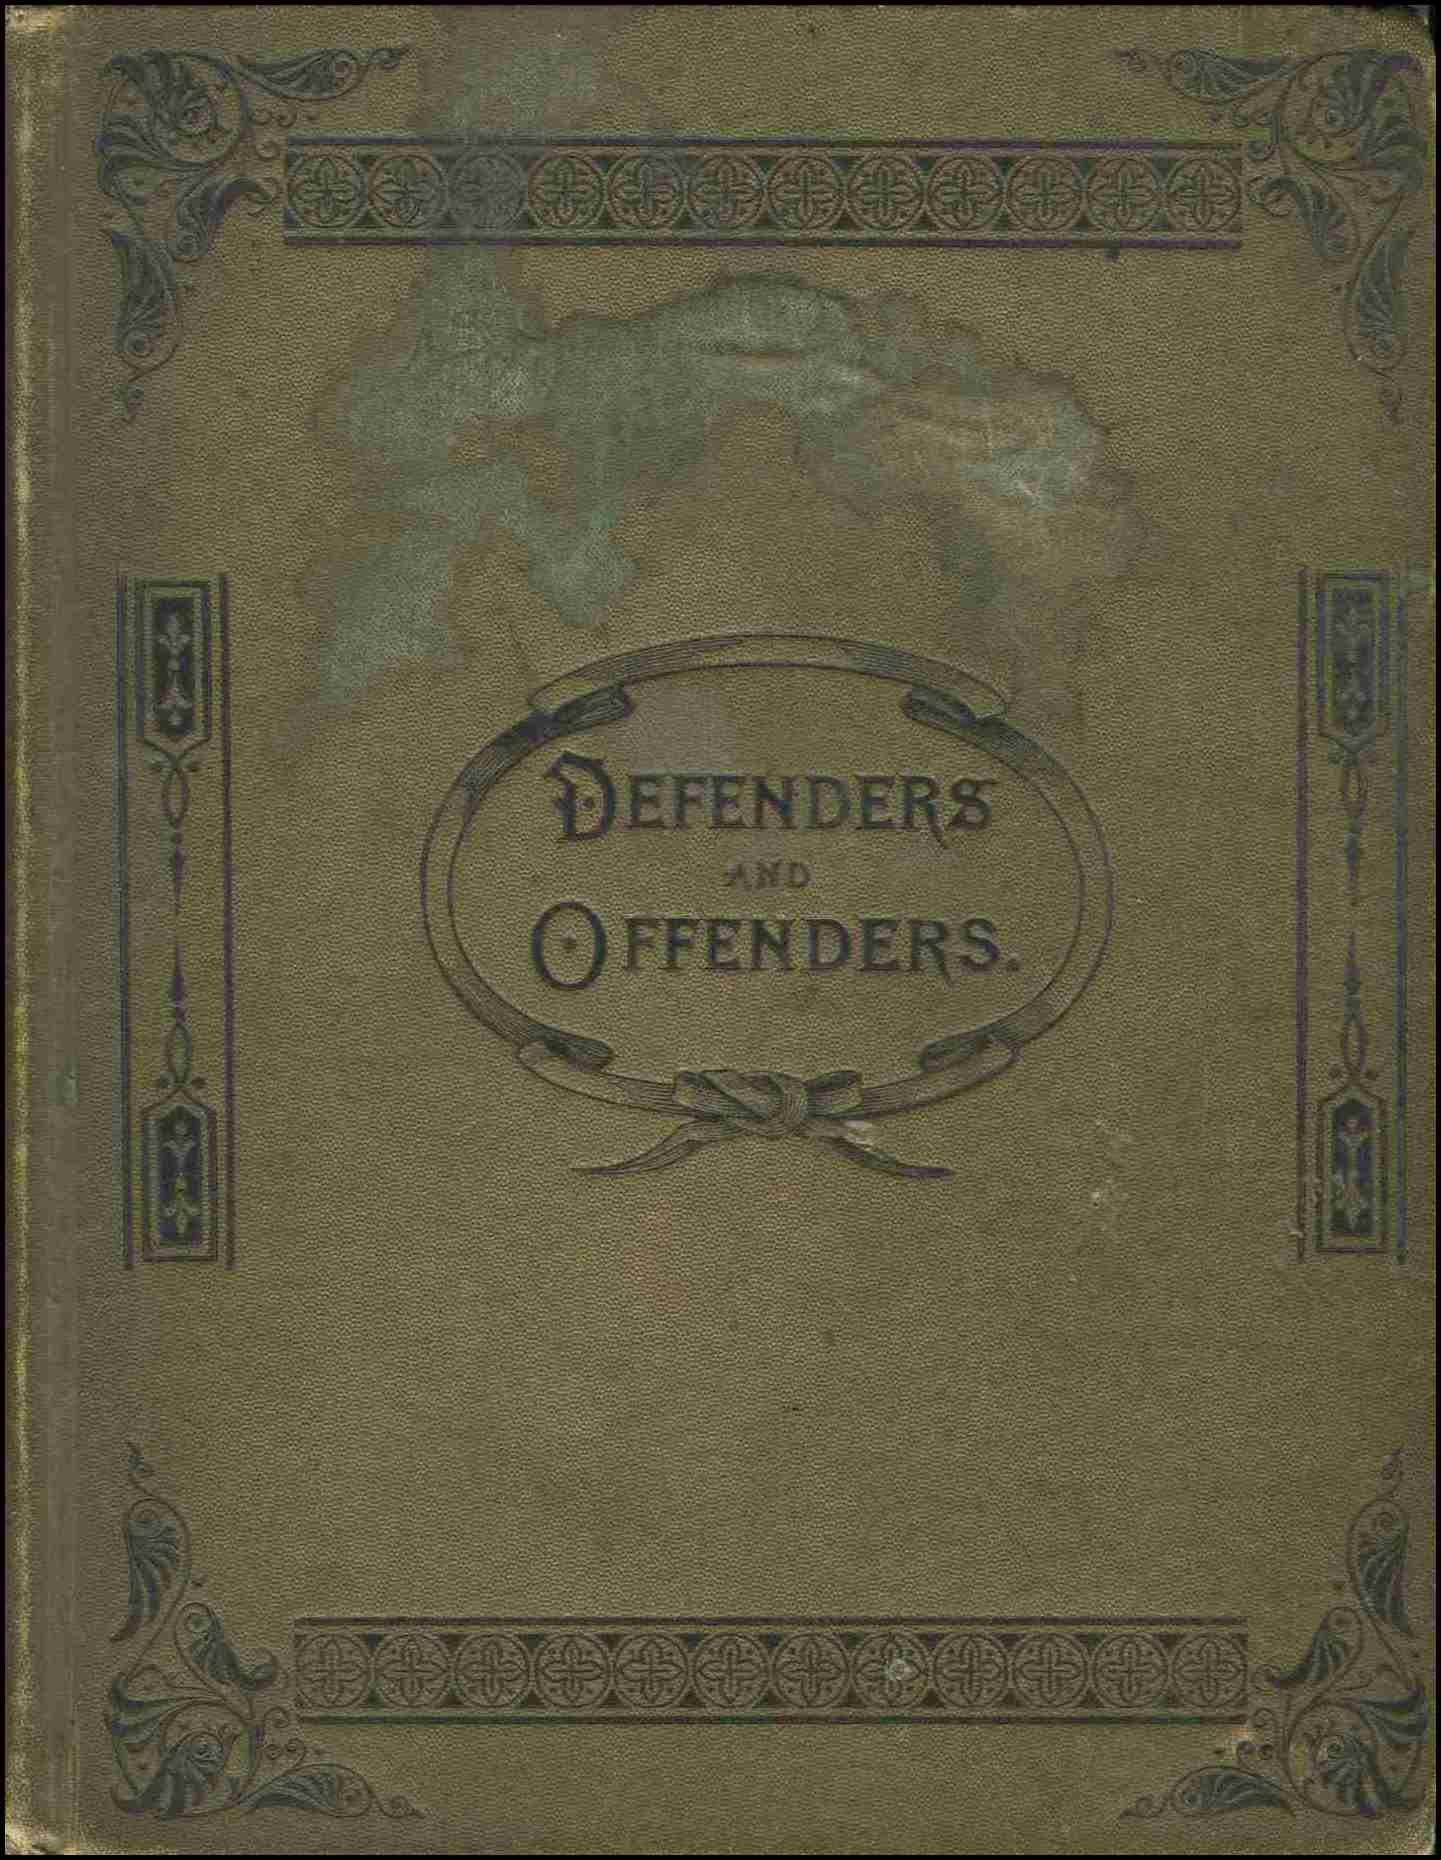 ALB A70 Buchner Tobacco Offenders and Defenders